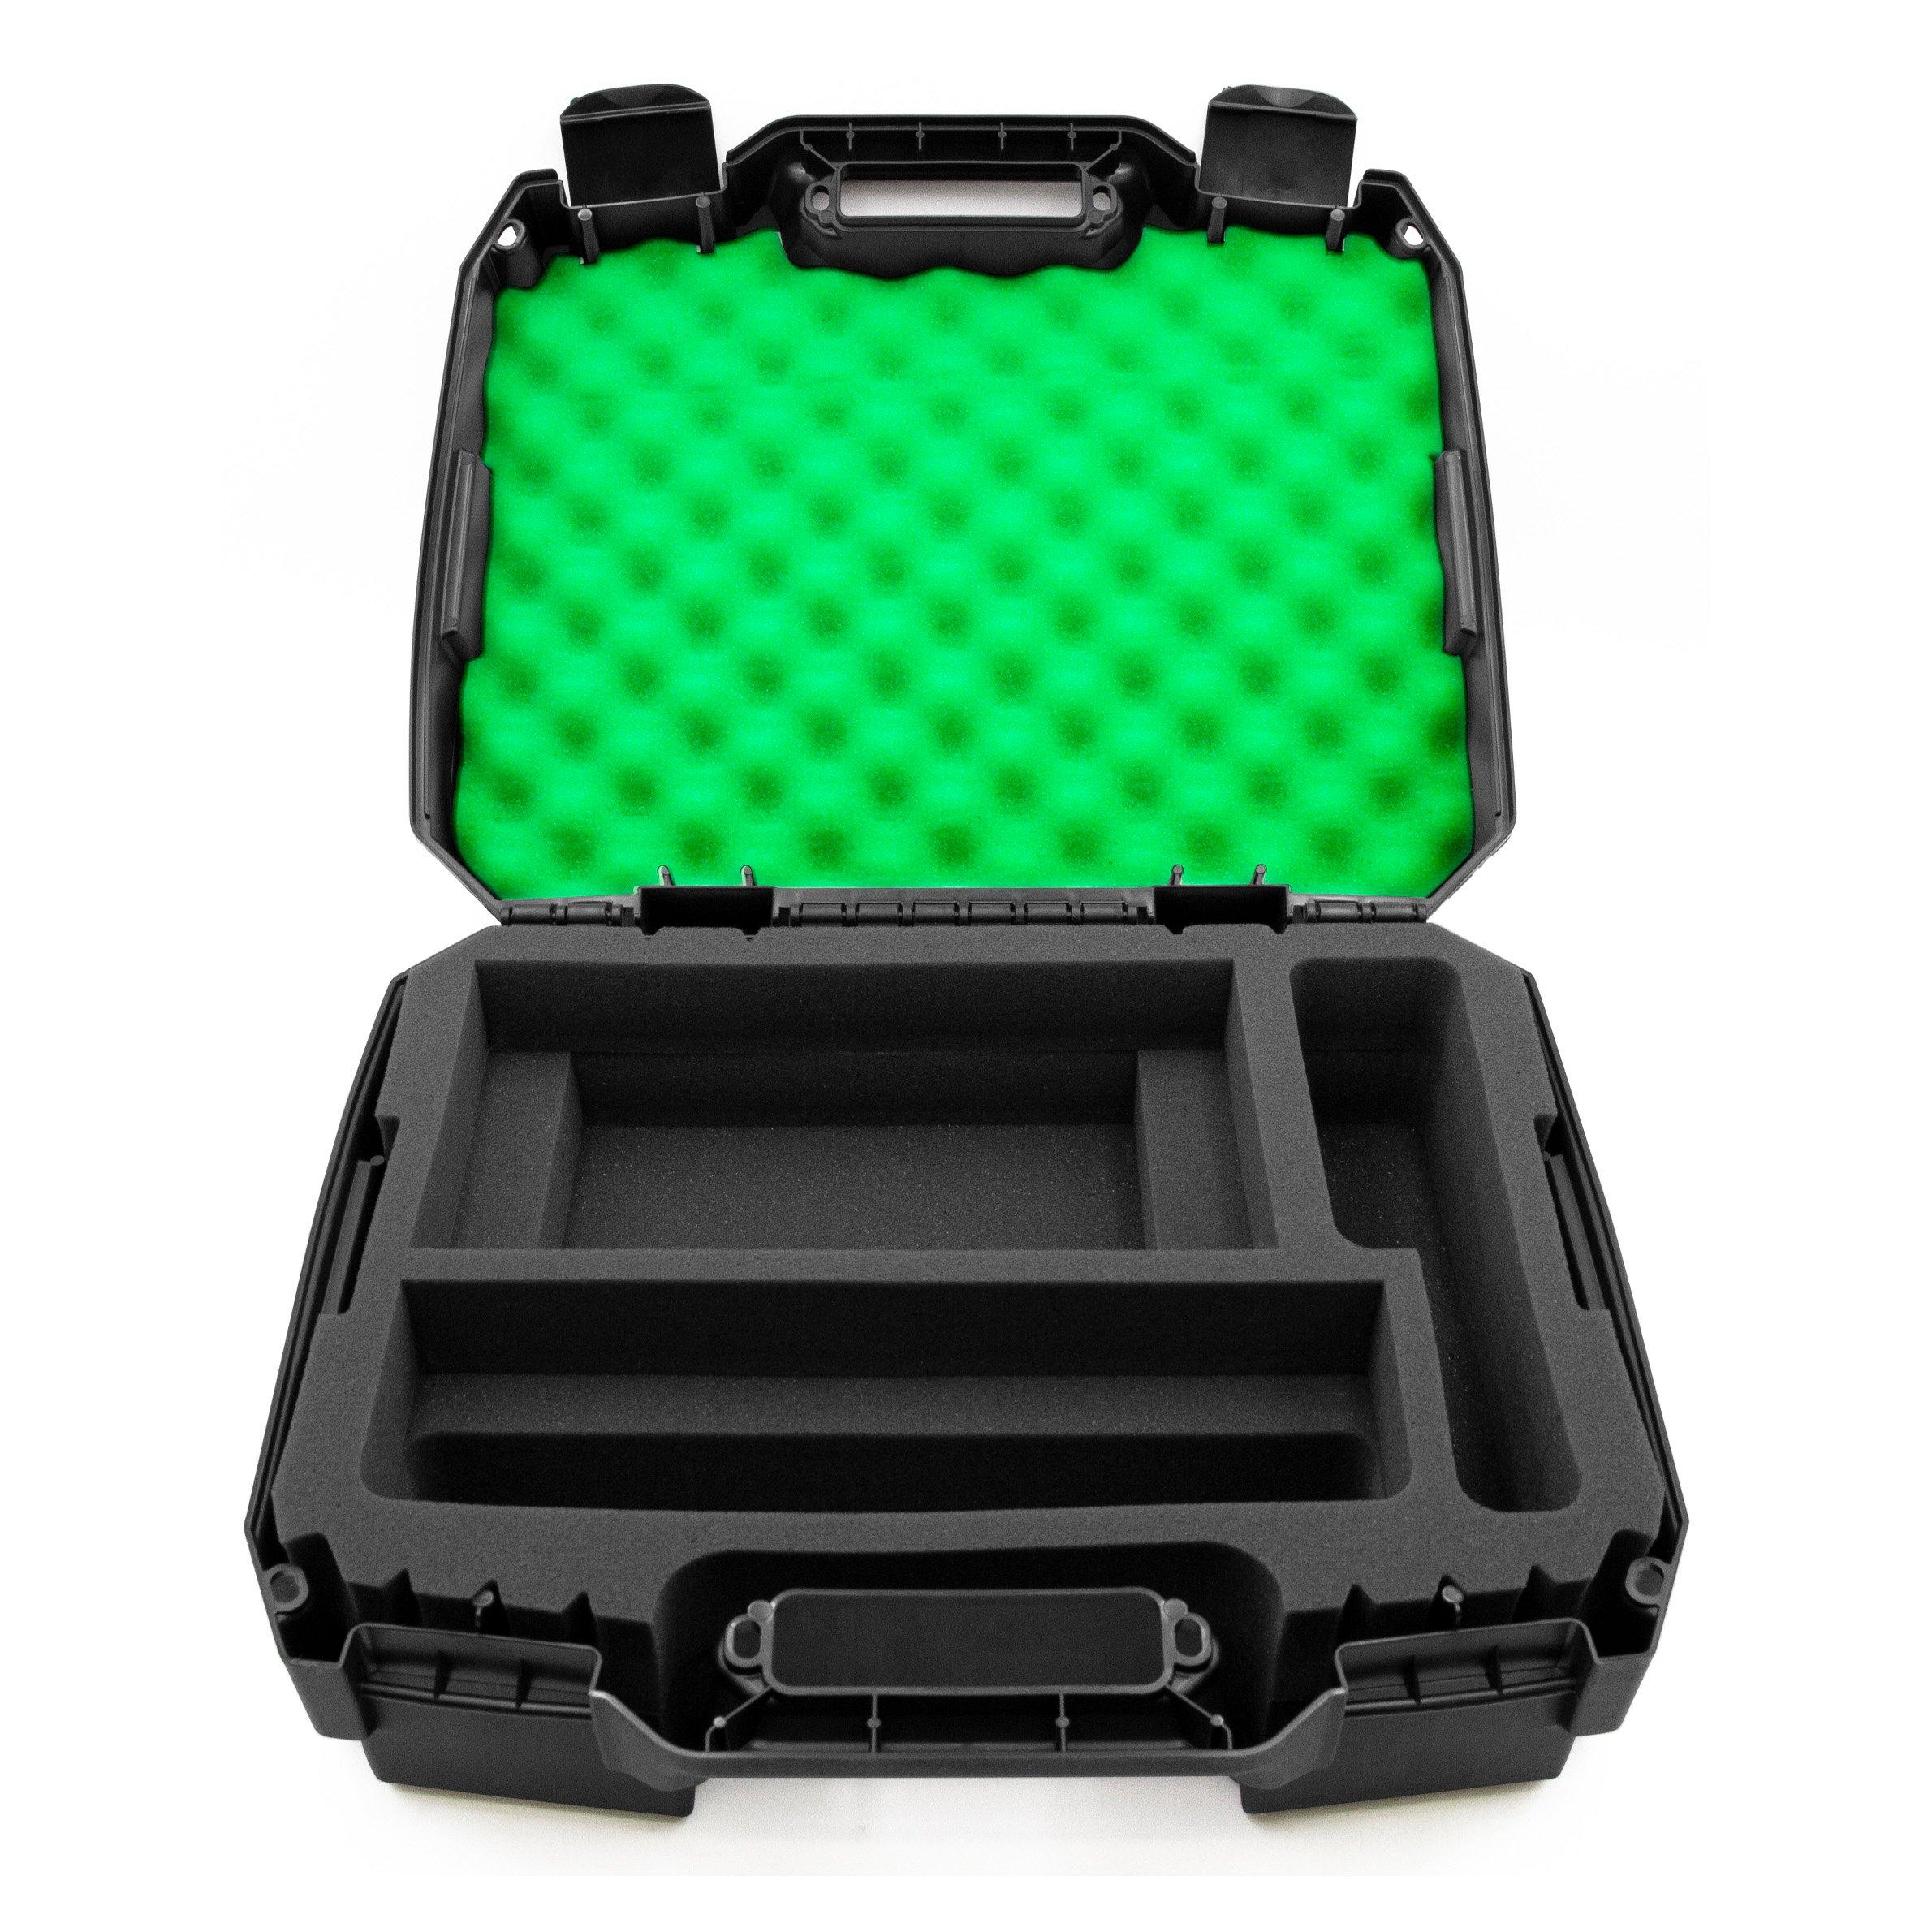 USA Gear Xbox Series X Carrying Case - Xbox Series X Travel Case Compatible  with Xbox Series